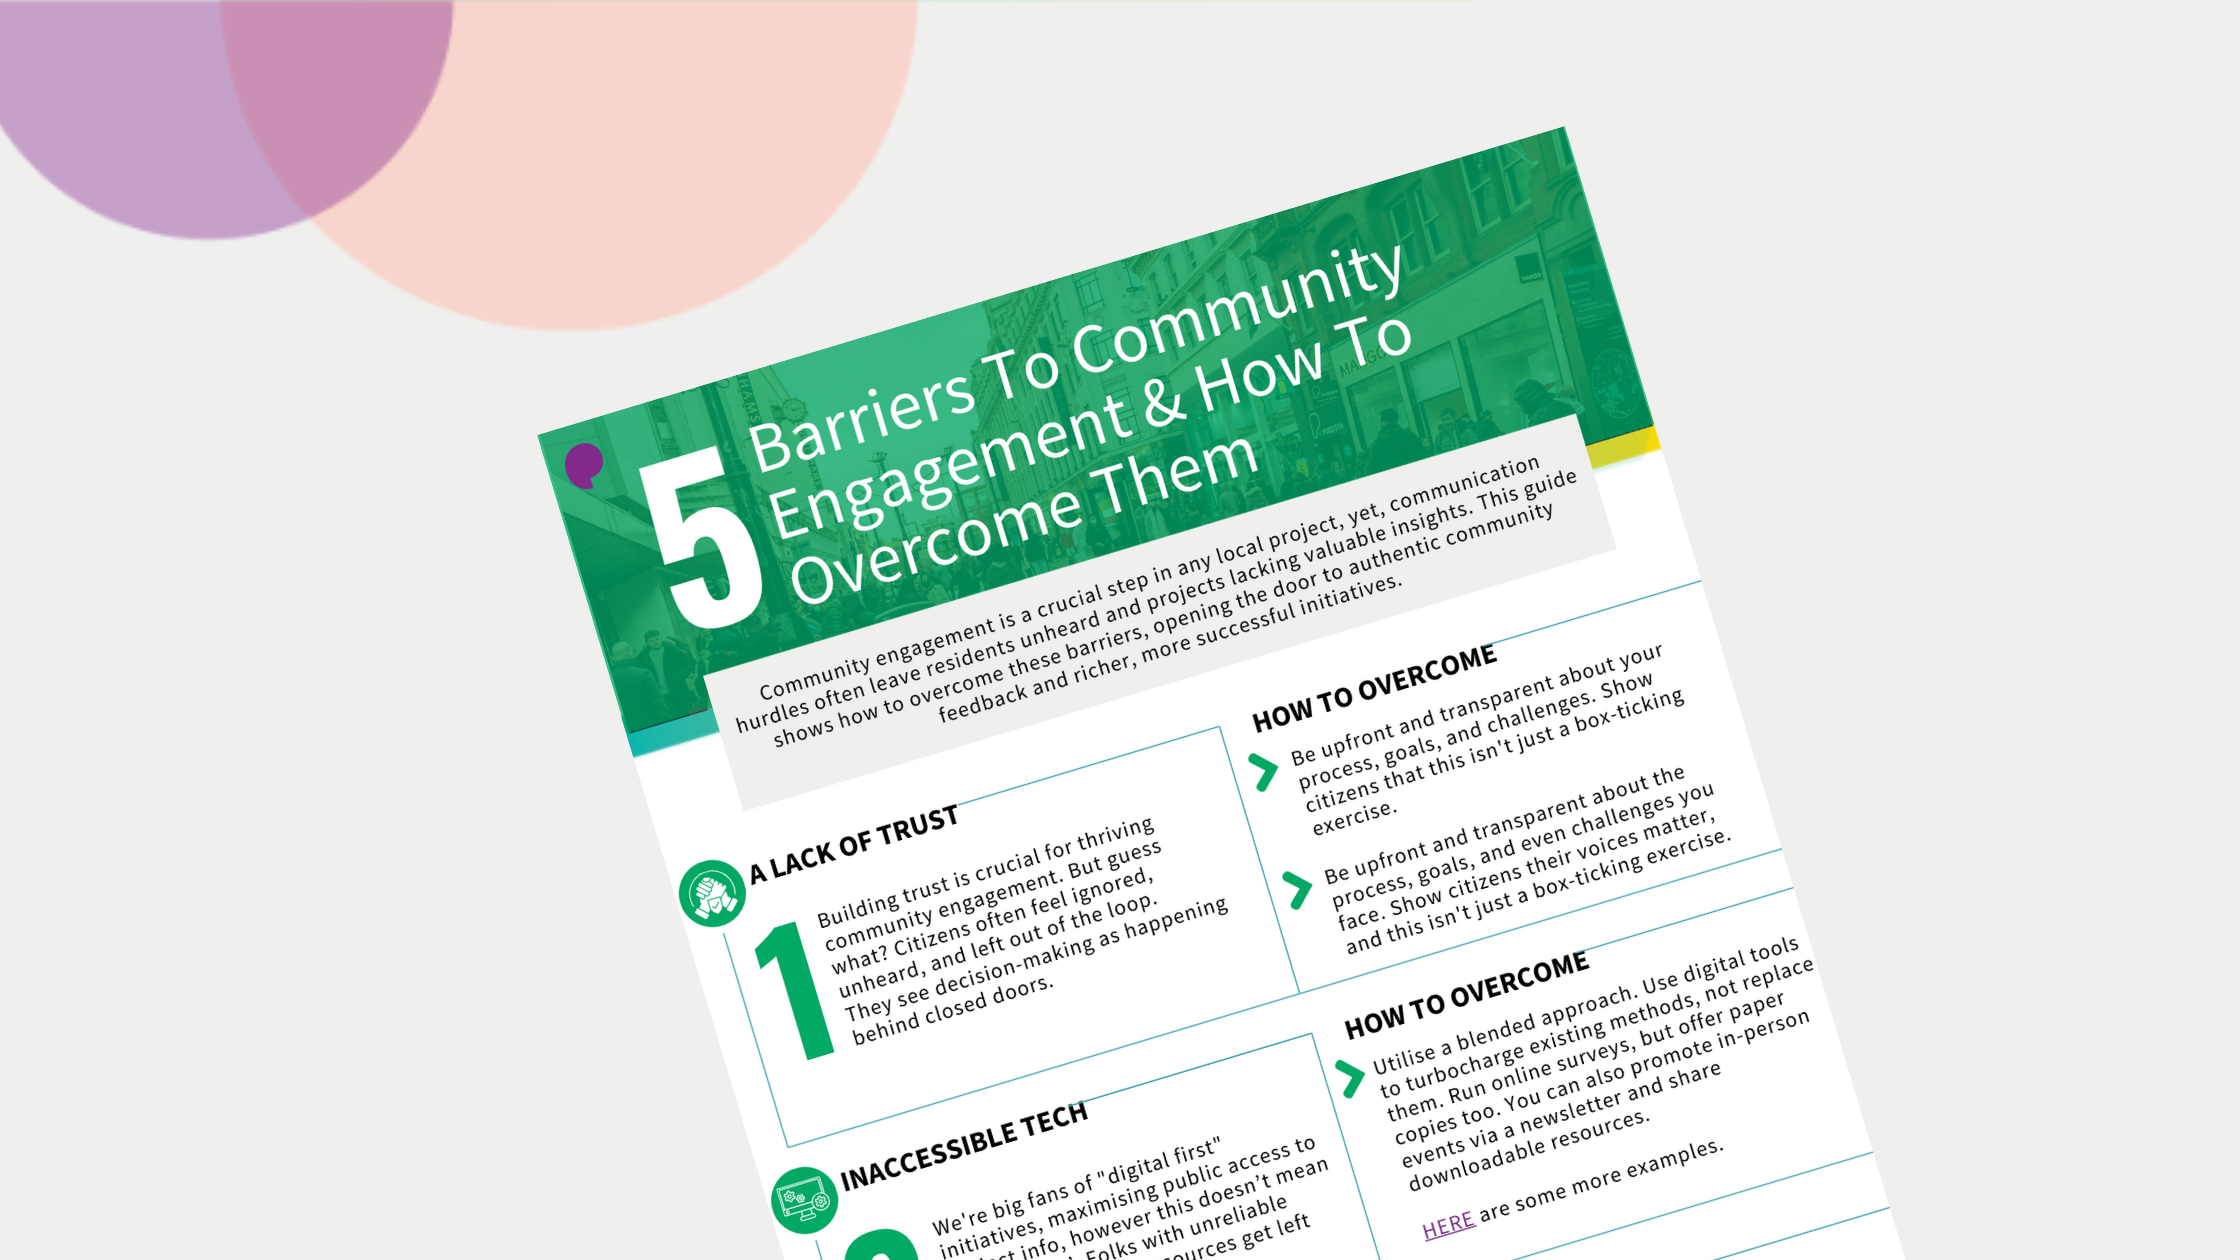 5 barriers to community engagement